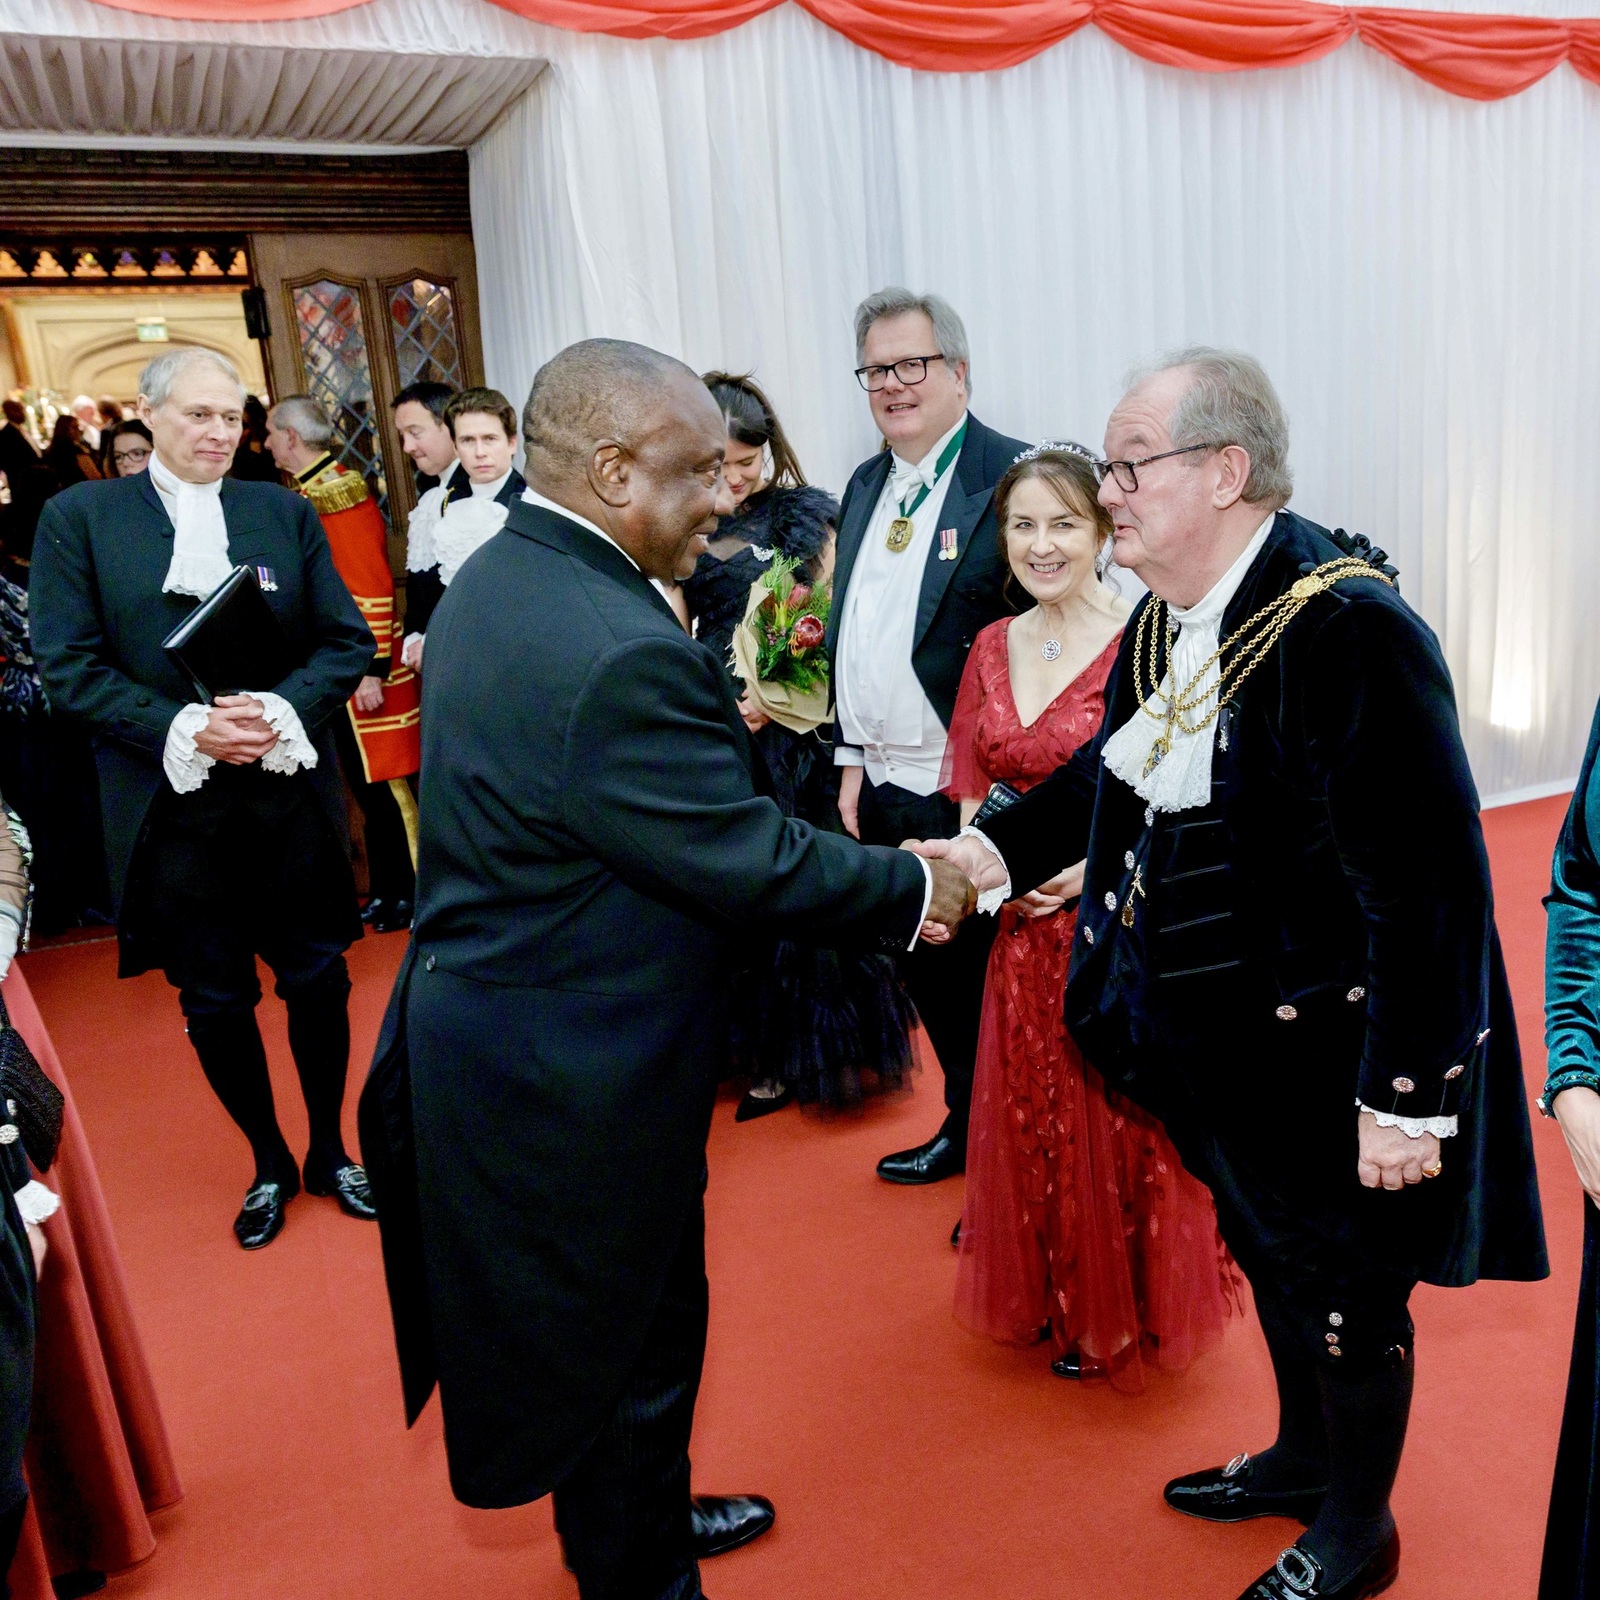 23 Nov 22 - Greeting the President Ramaphosa of South Africa at the Guildhall State Banquet